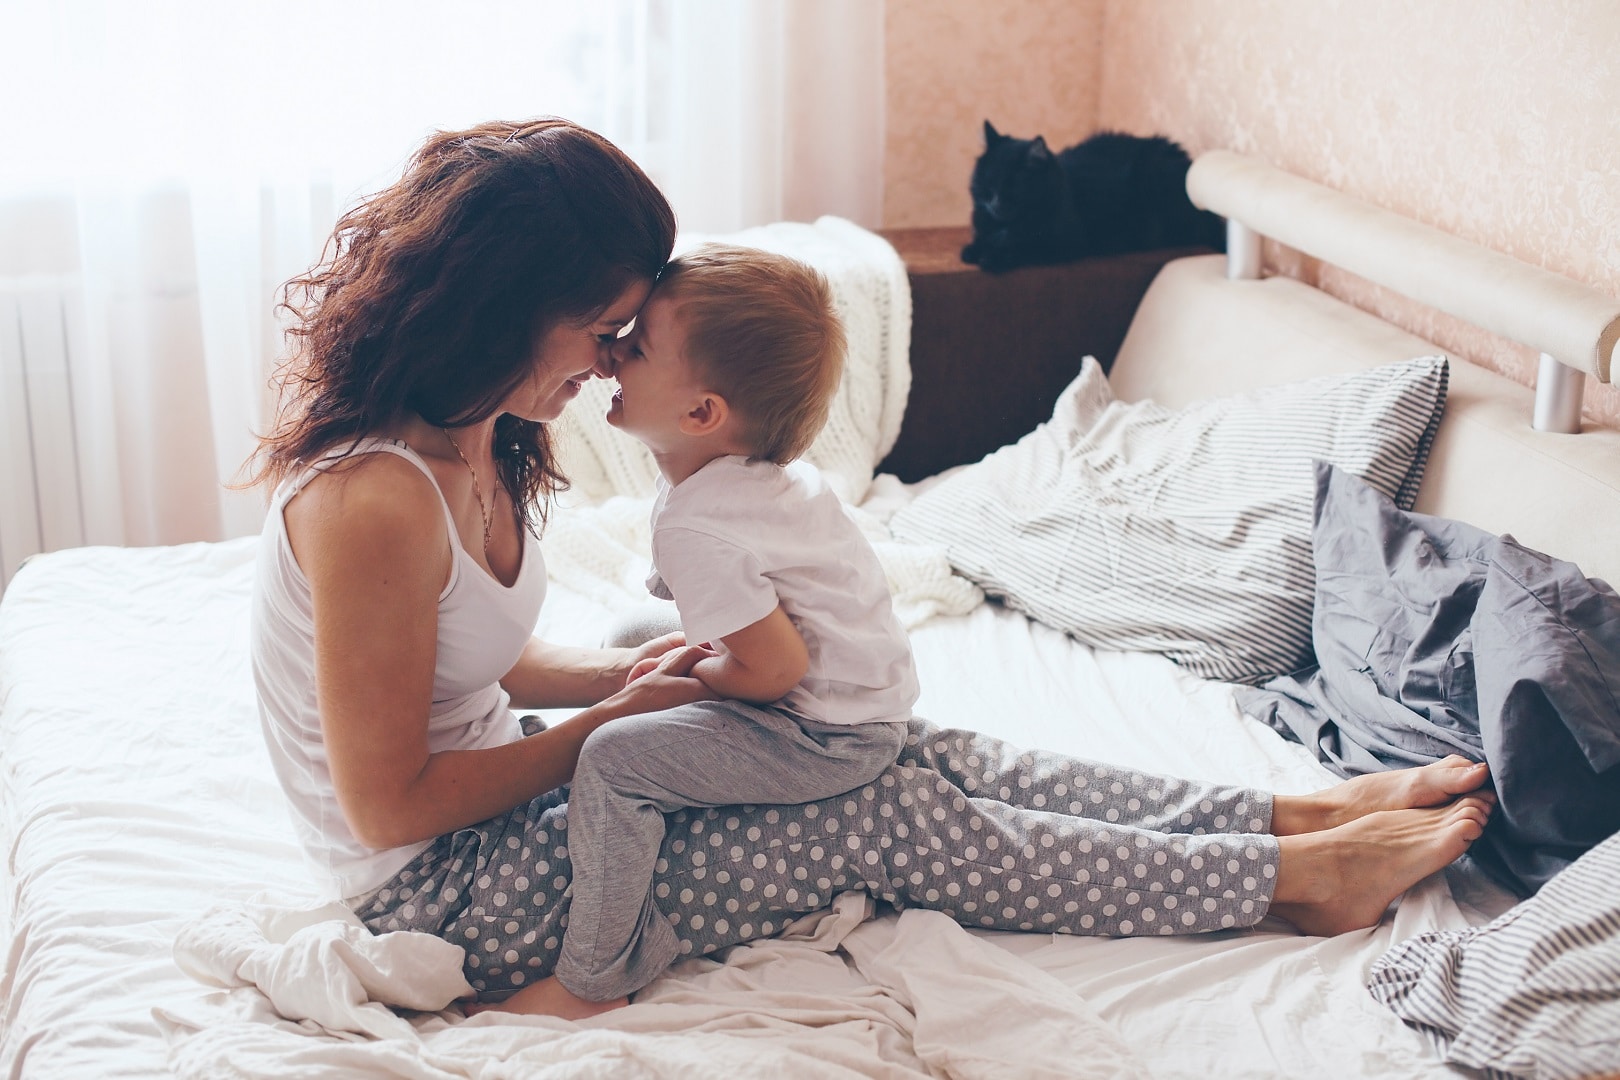 Parents Of Toddlers Have Sex An Average of 0 Times Per Month - 13 Best Parenting Tips for Busy Moms